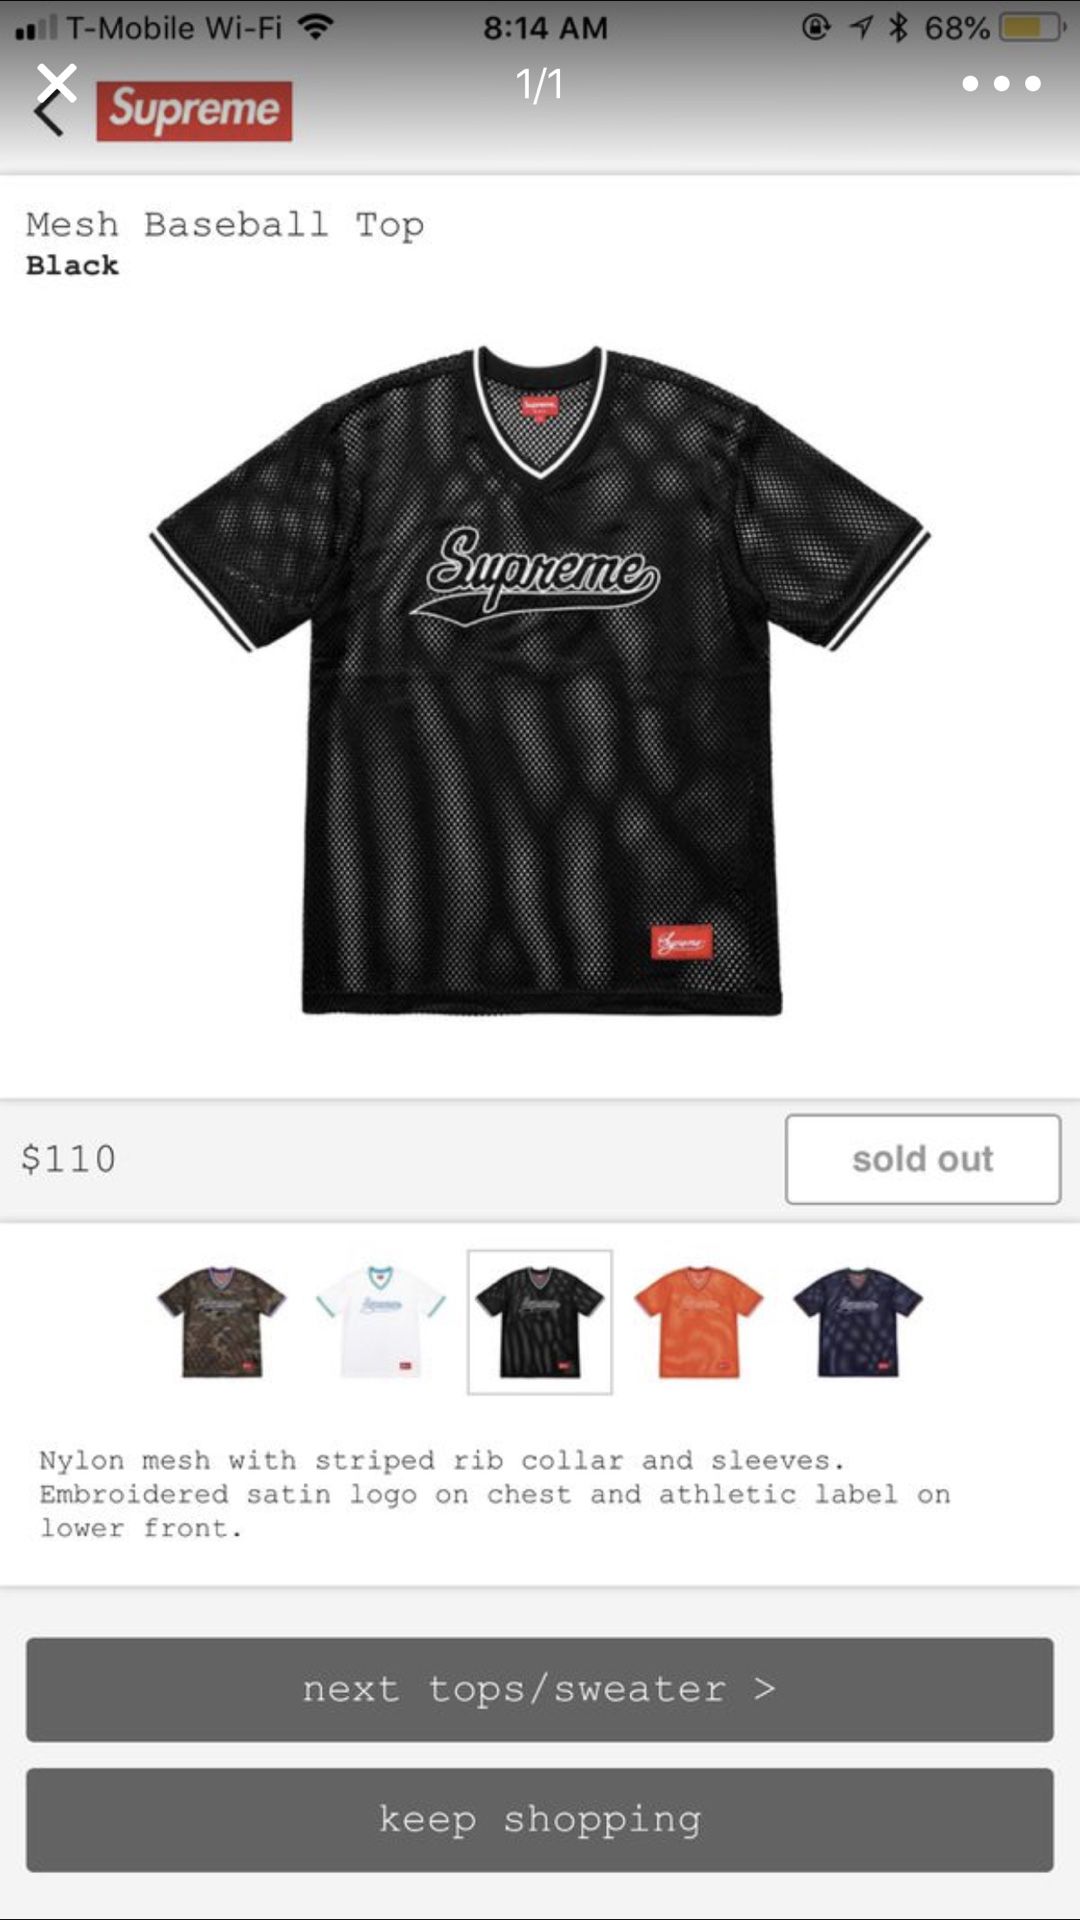 Supreme mesh baseball jersey for Sale in Irvine, CA   OfferUp